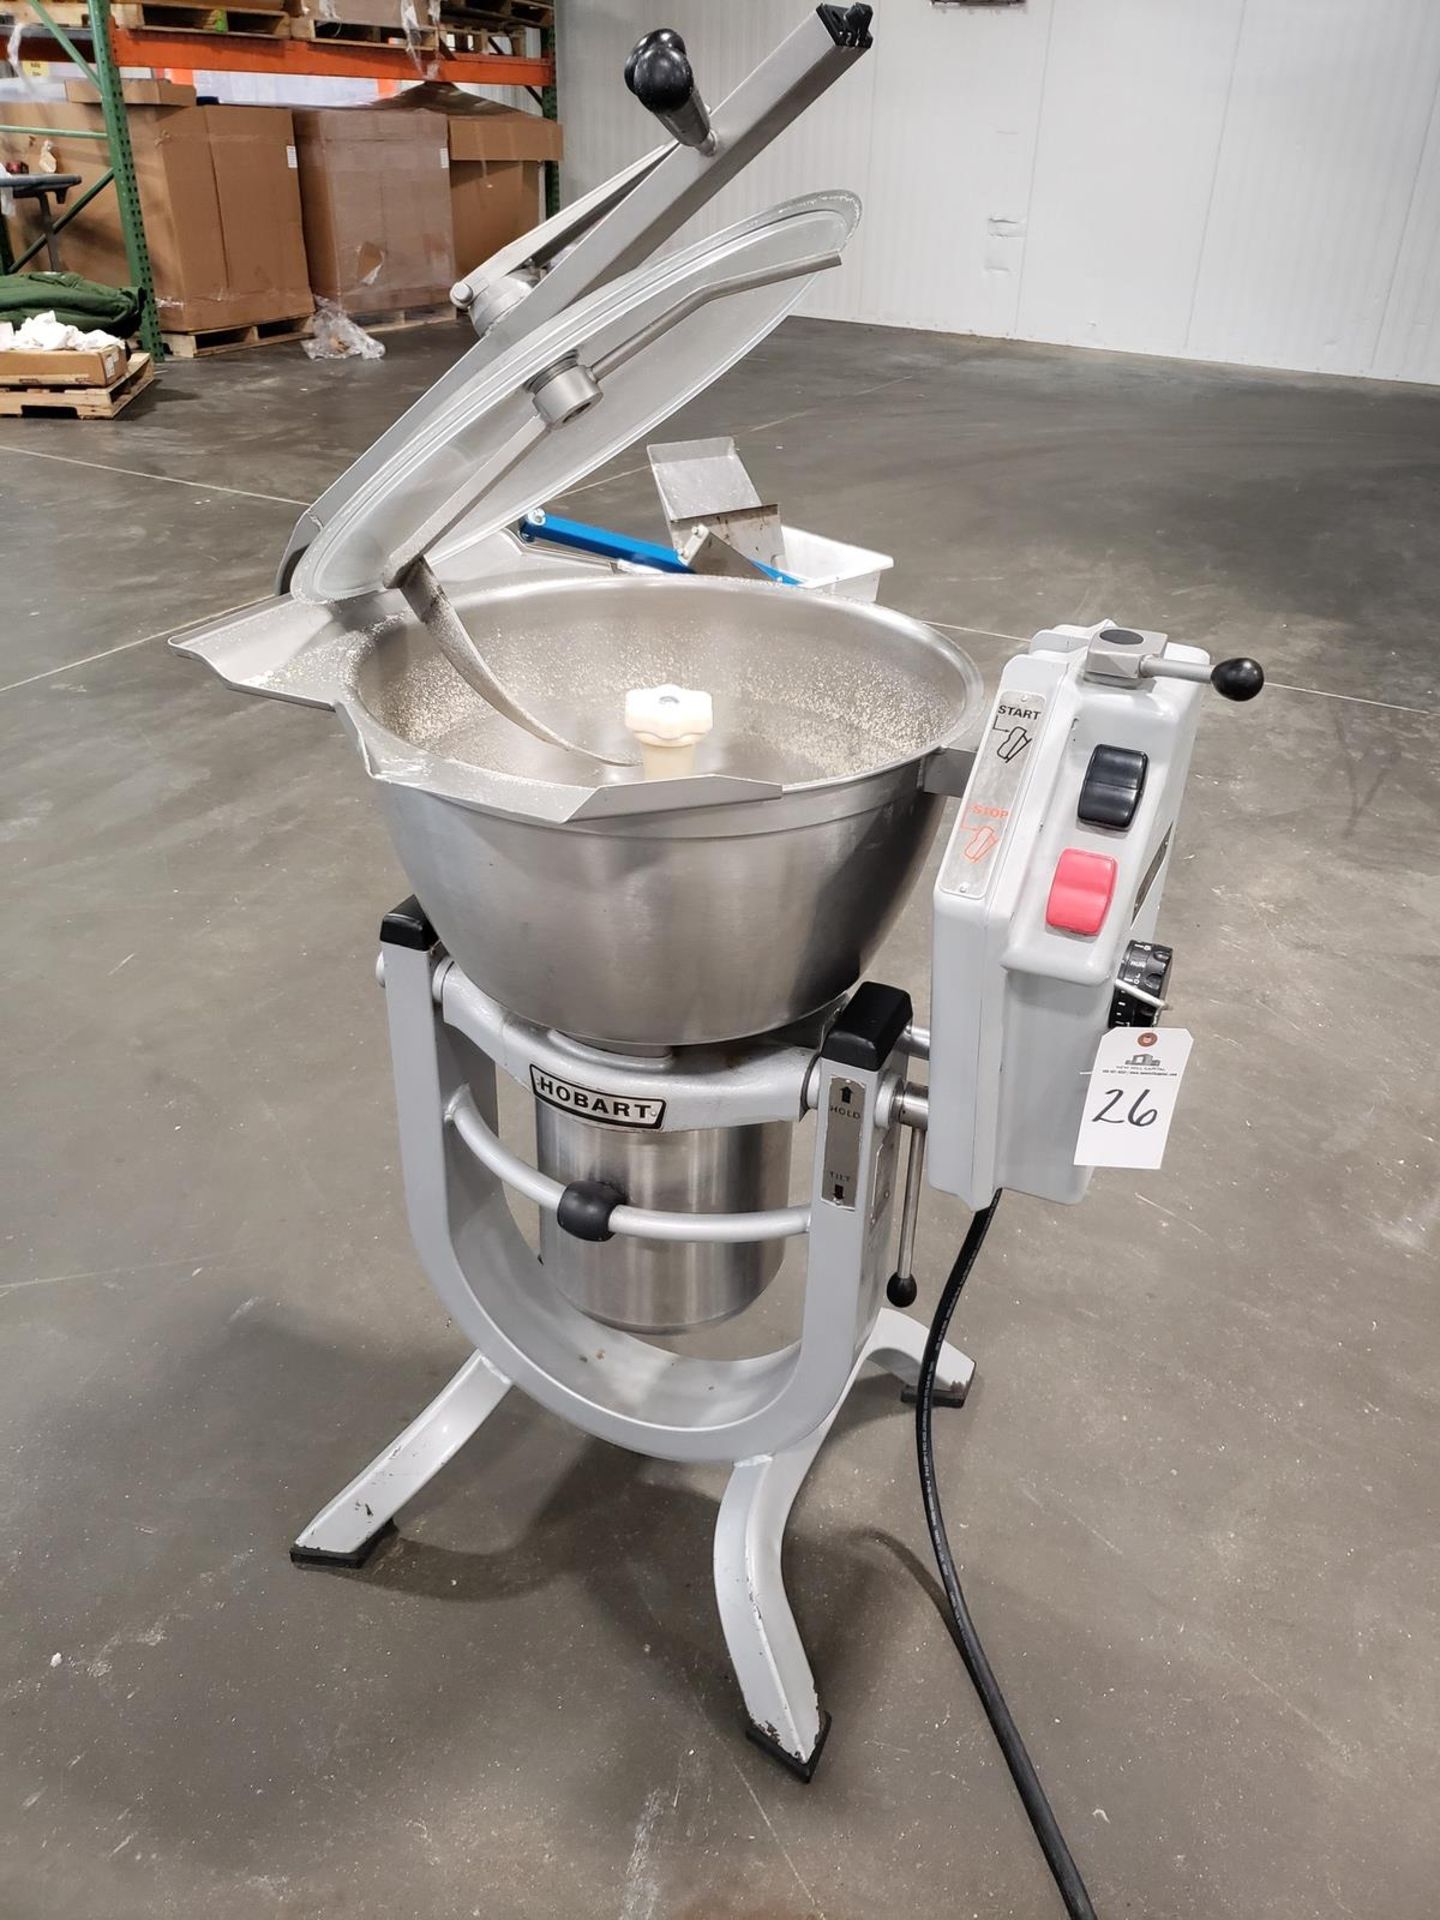 Hobart Cutter Mixer W/Stainless Tilting Bowl, M# HCM 450, S/N 31-1185-731 | Rig Fee: $75